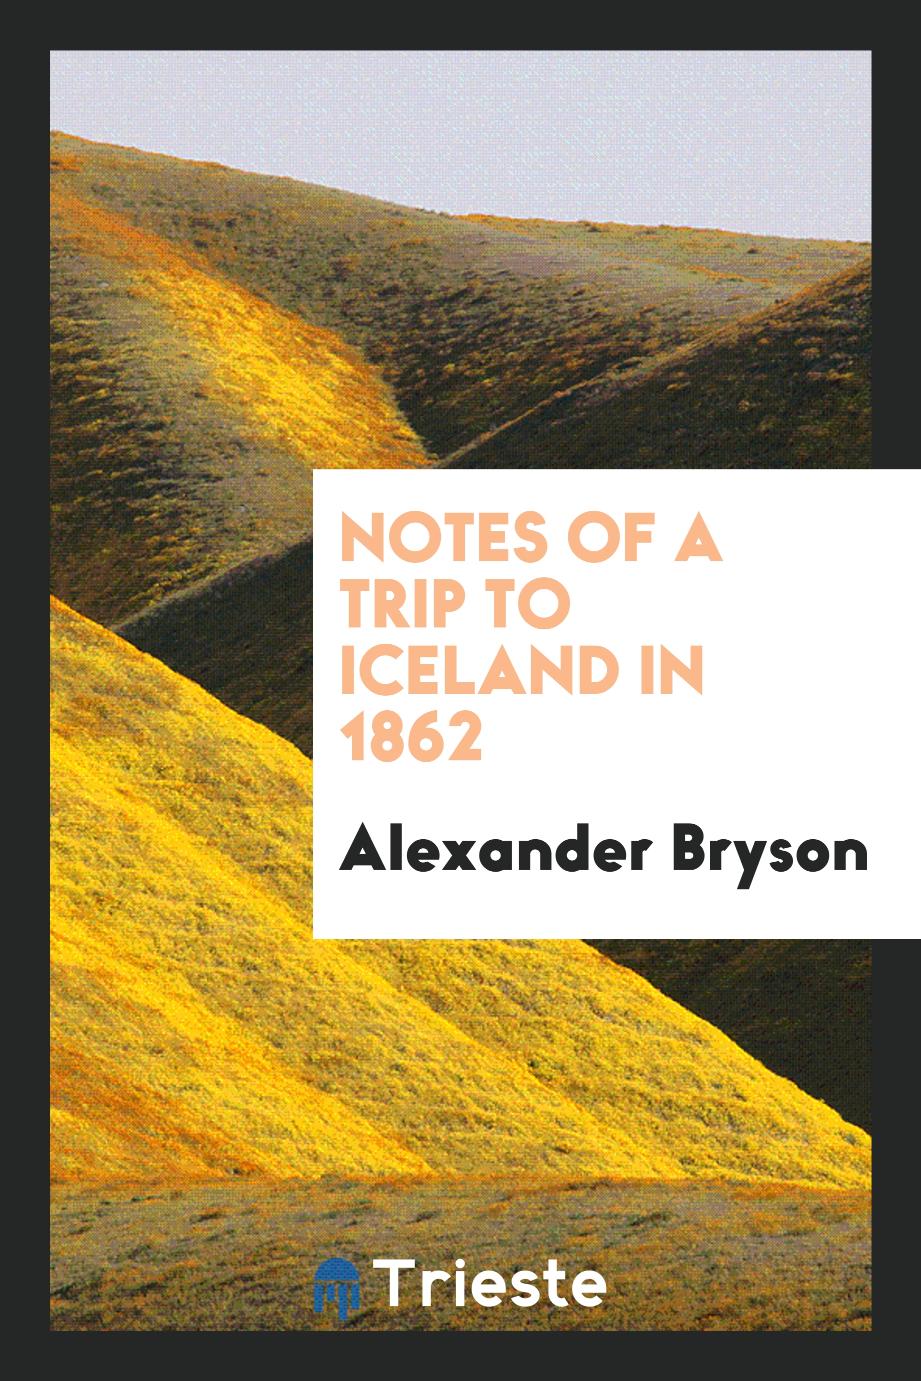 Notes of a trip to Iceland in 1862